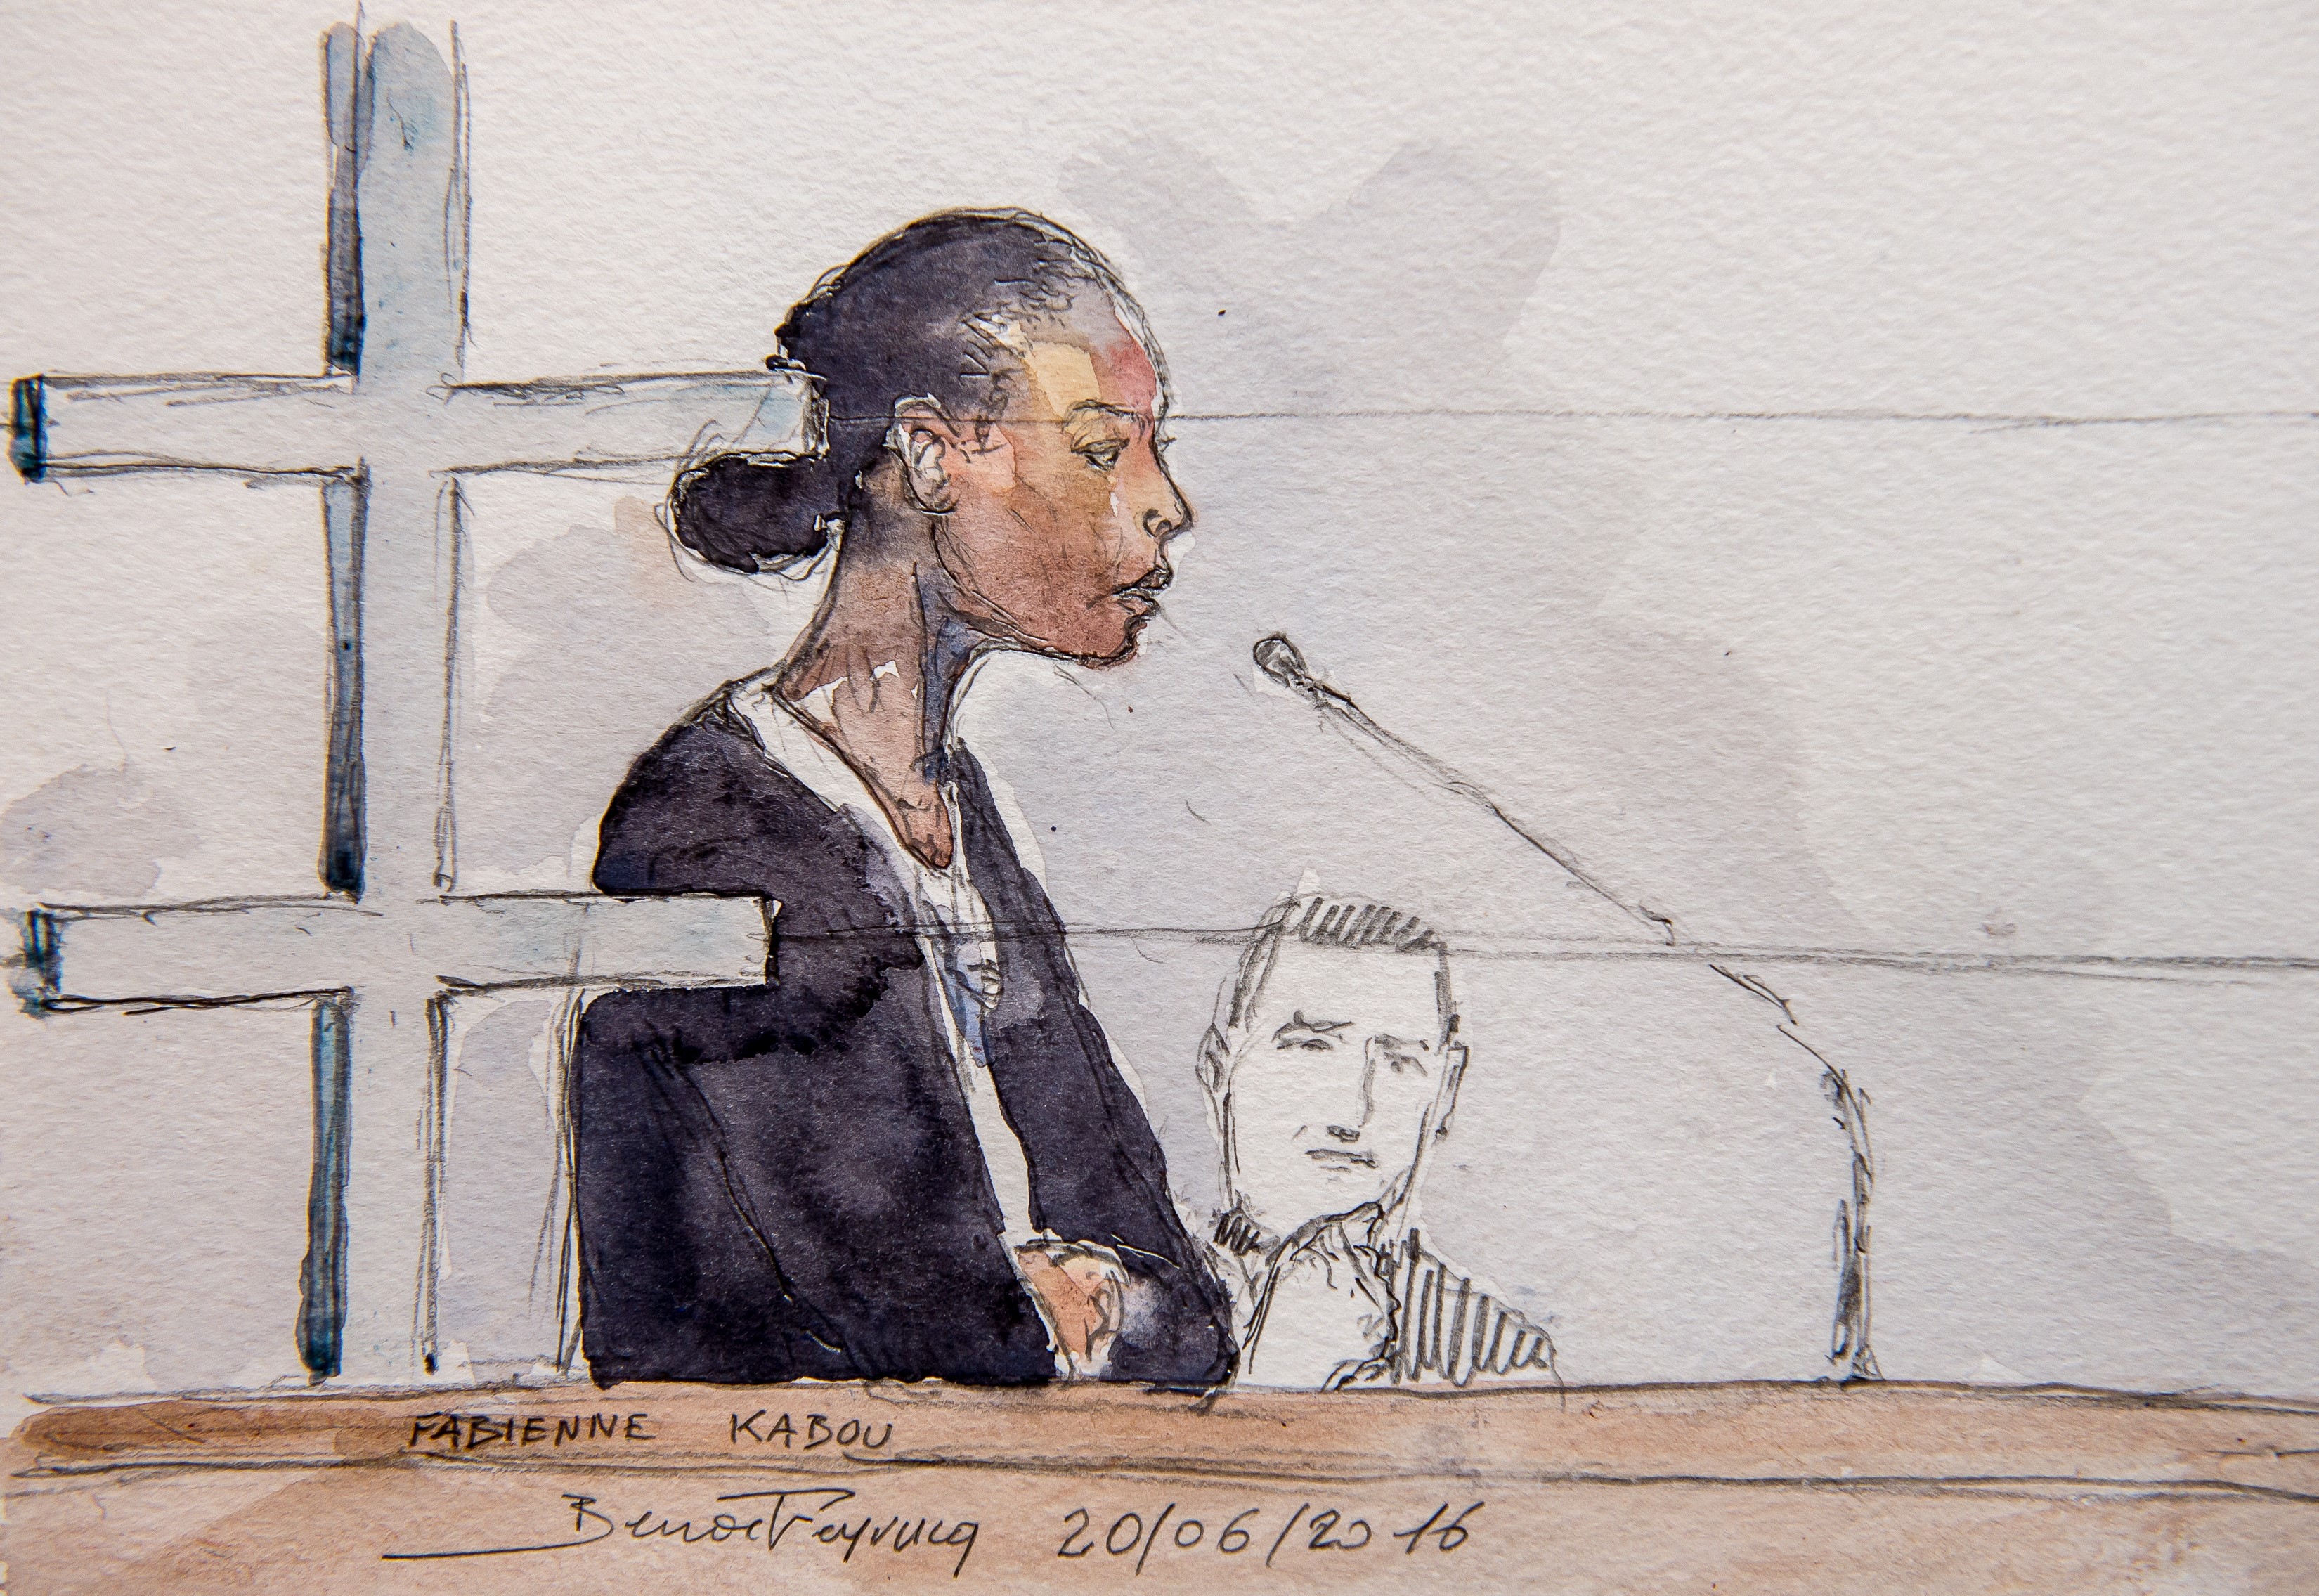 This court sketch made on June 20, 2016 shows Fabienne Kabou speaking during the first day of her trial in the Saint-Omer assize court's hearing room, in Saint-Omer. Fabienne Kabou faces trial from June 20 for having allegedly killed her 15-month-old daughter, Adelaide, by abandonning her on a beach in Berck-sur-Mer. / AFP PHOTO / BENOIT PEYRUCQ